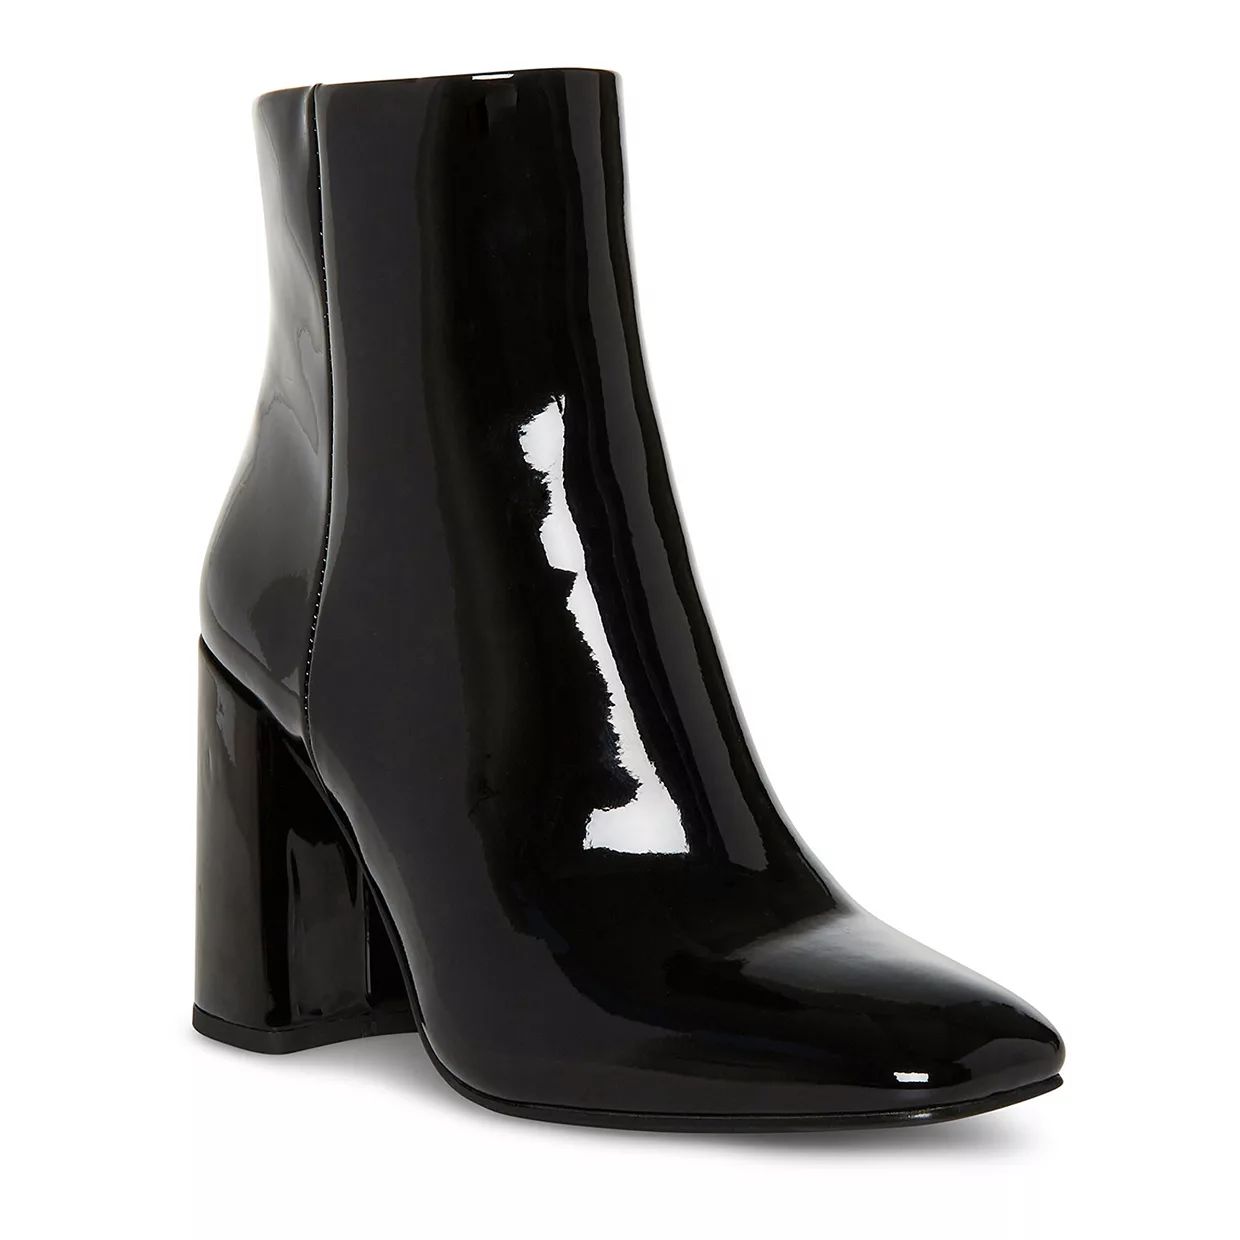 madden girl While Black Patent Women's Heeled Booties | Kohl's